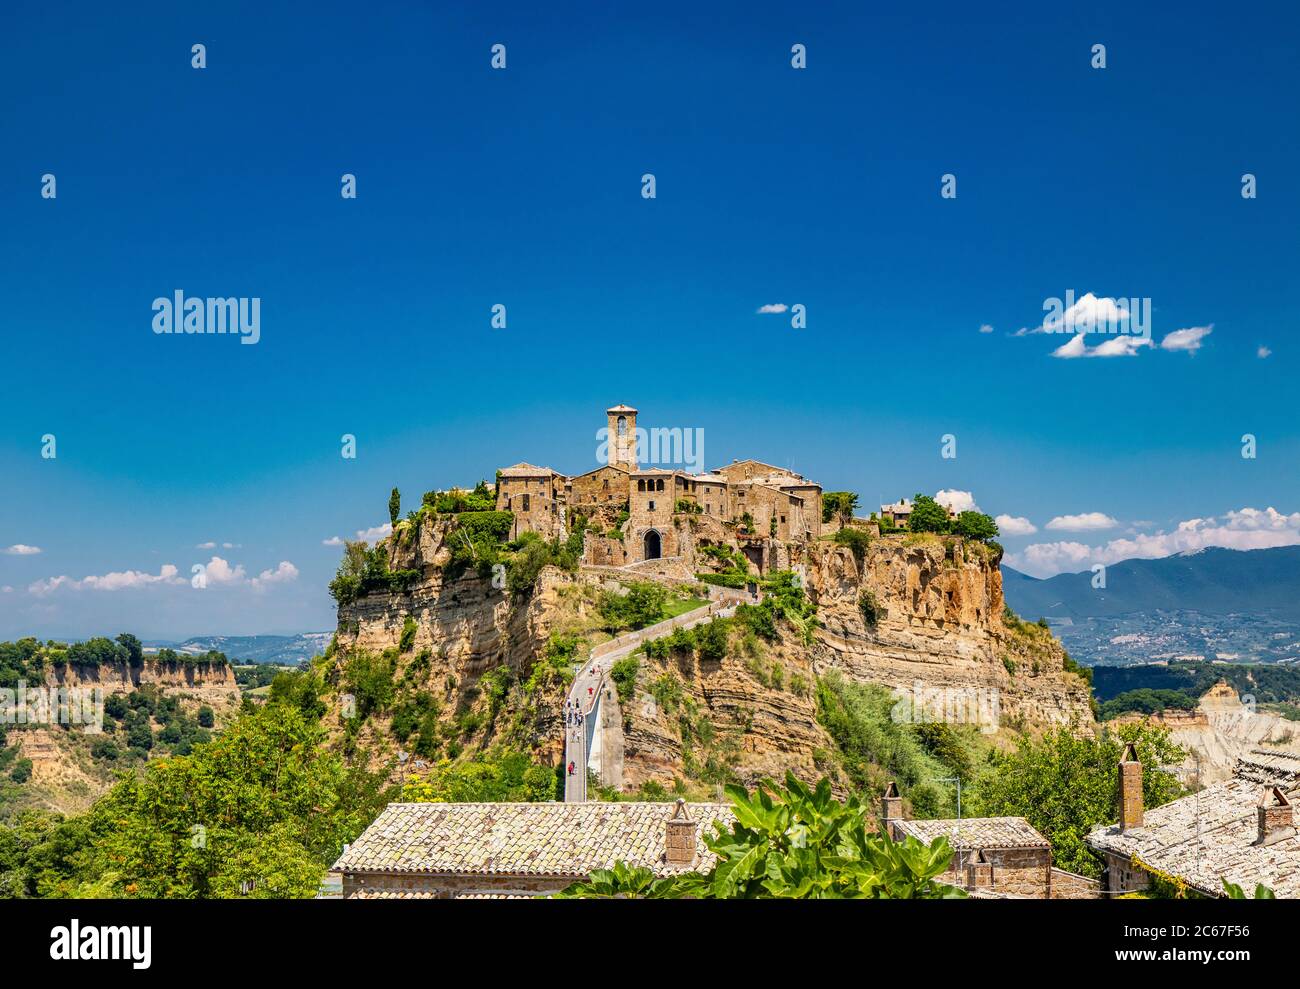 View of the medieval town of Civita di Bagnoregio, located on the top of a spur of tuff rock, in the middle of the valley of the badlands. Connected t Stock Photo